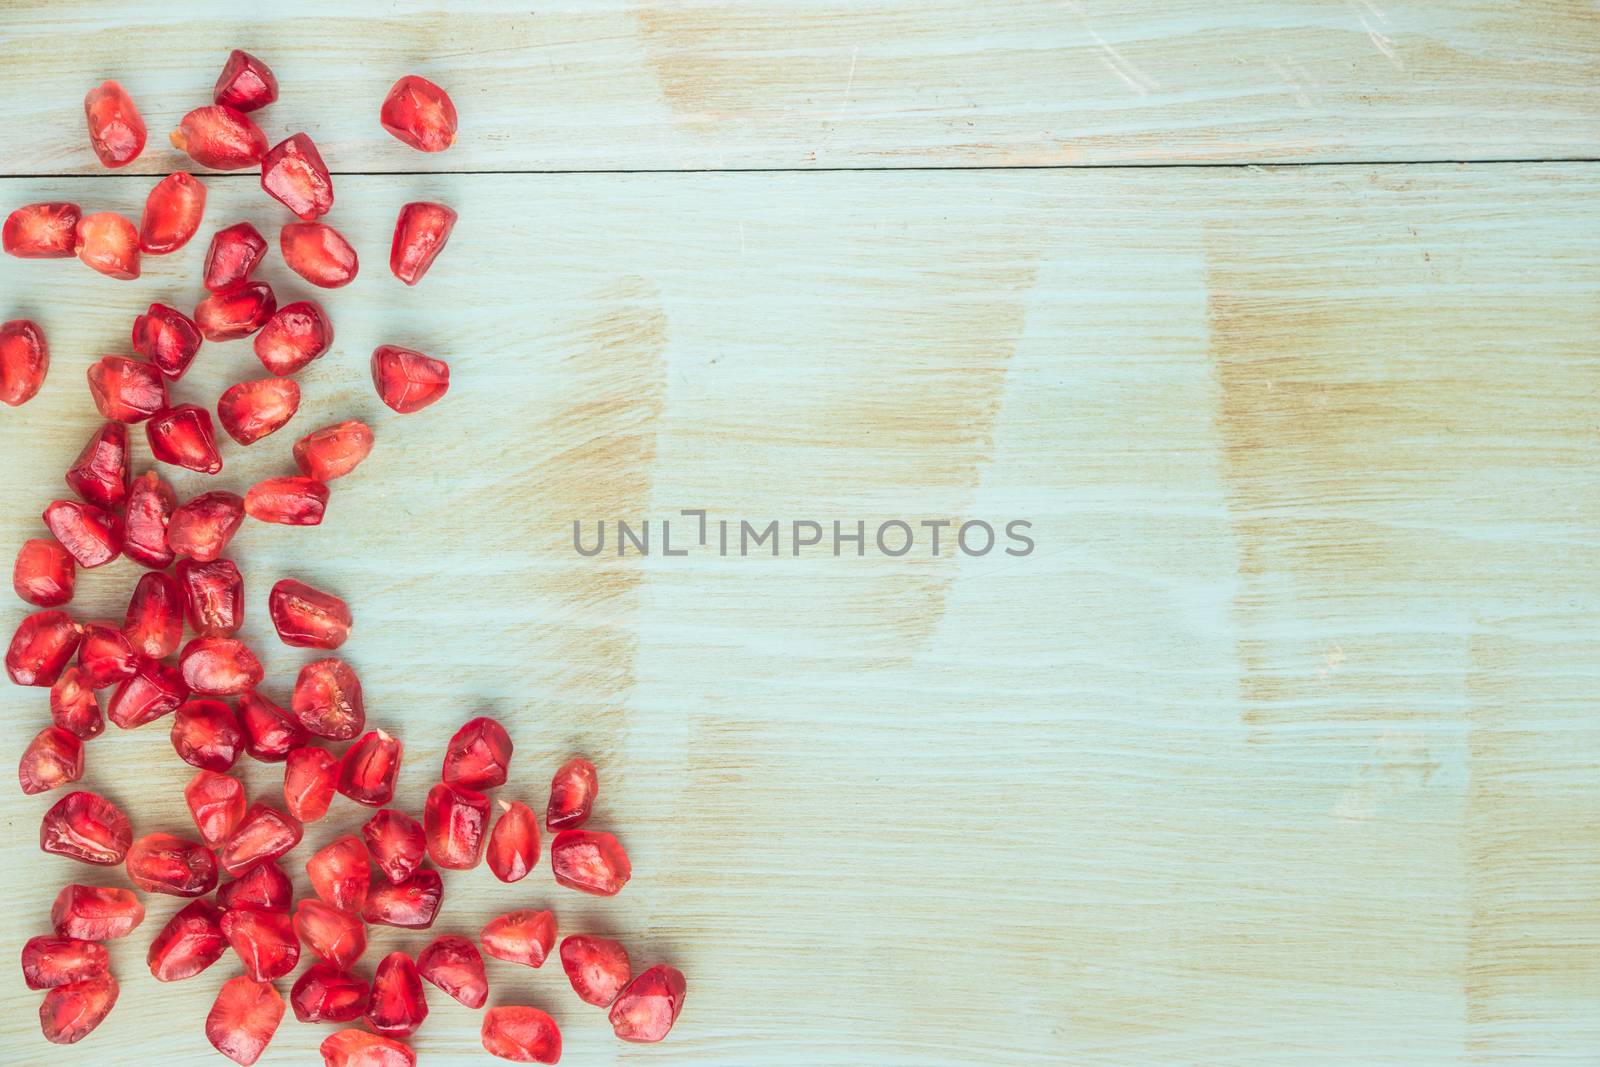 Pomegranate seeds over grunge wooden background by AnaMarques